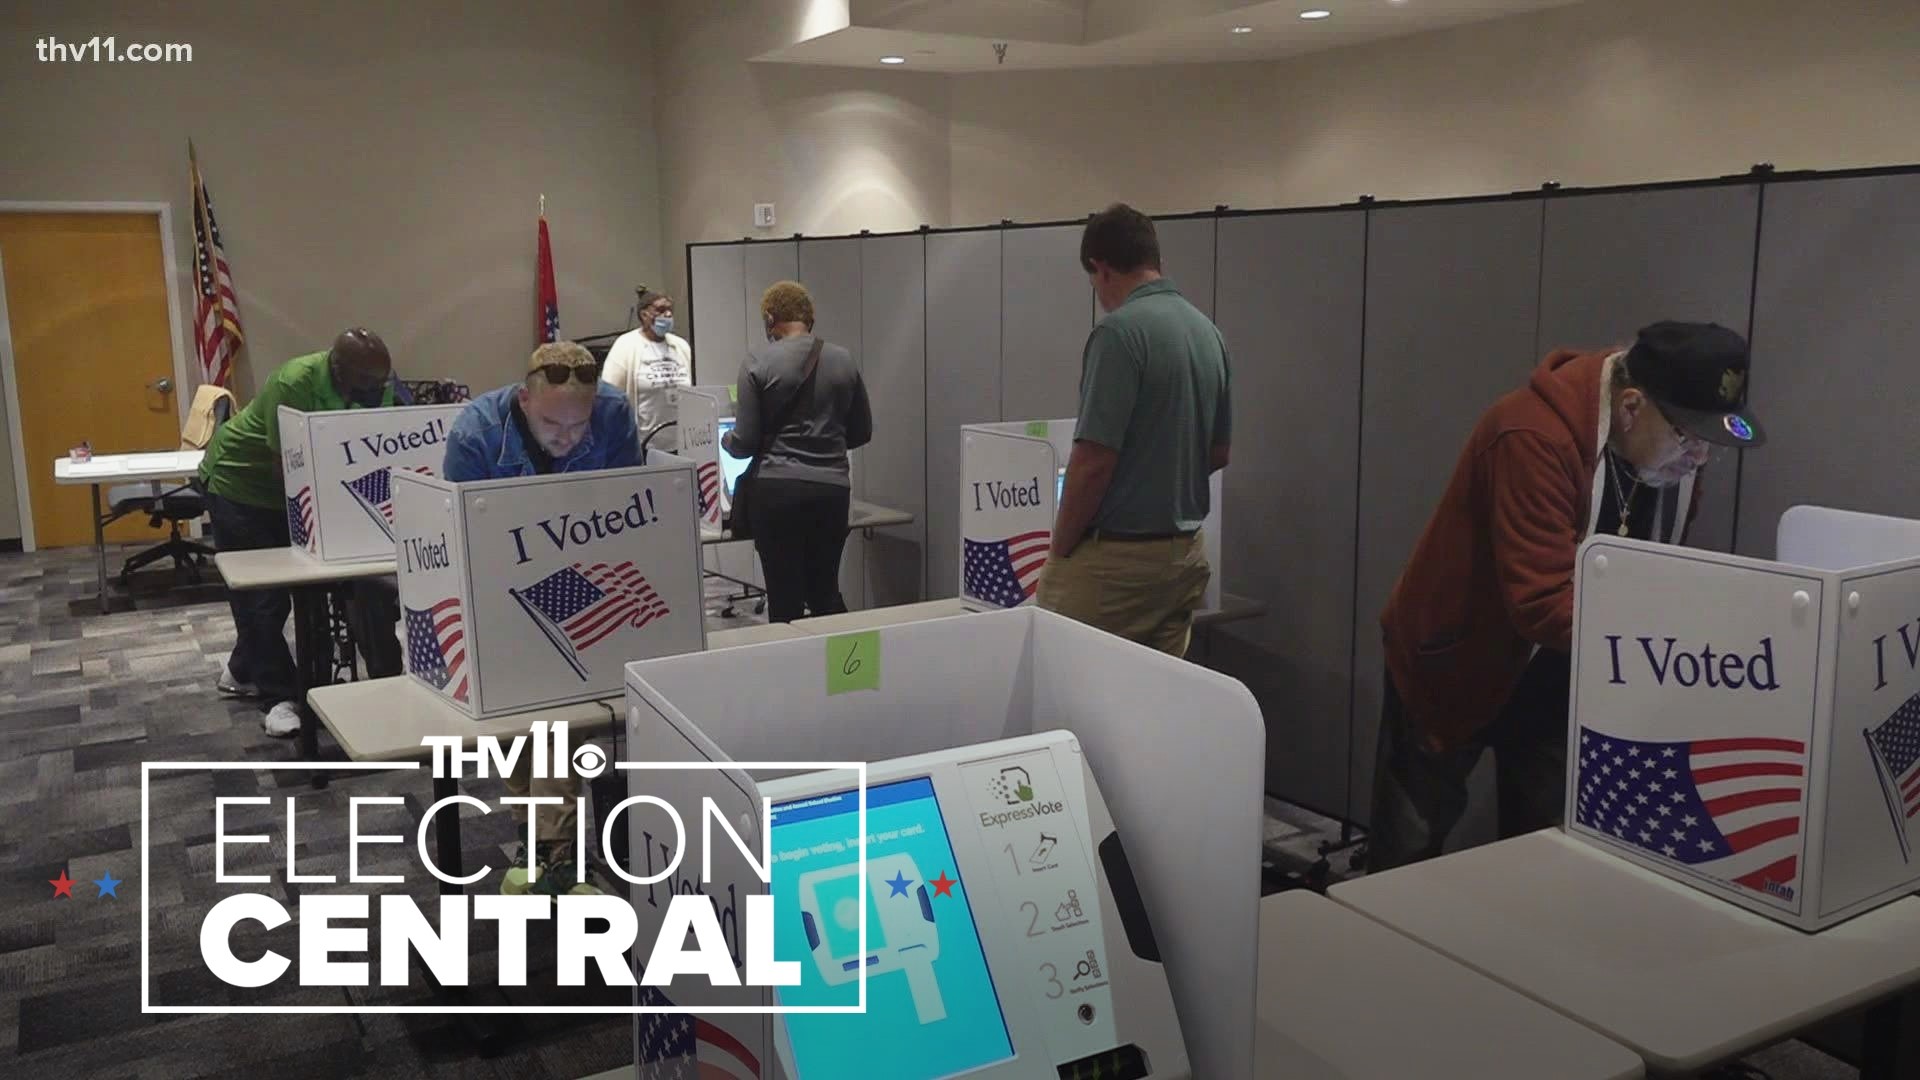 After the 2020 election, Pulaski County upgraded its equipment to make voting easier and more accurate. Now we're taking a closer look at the voting process.